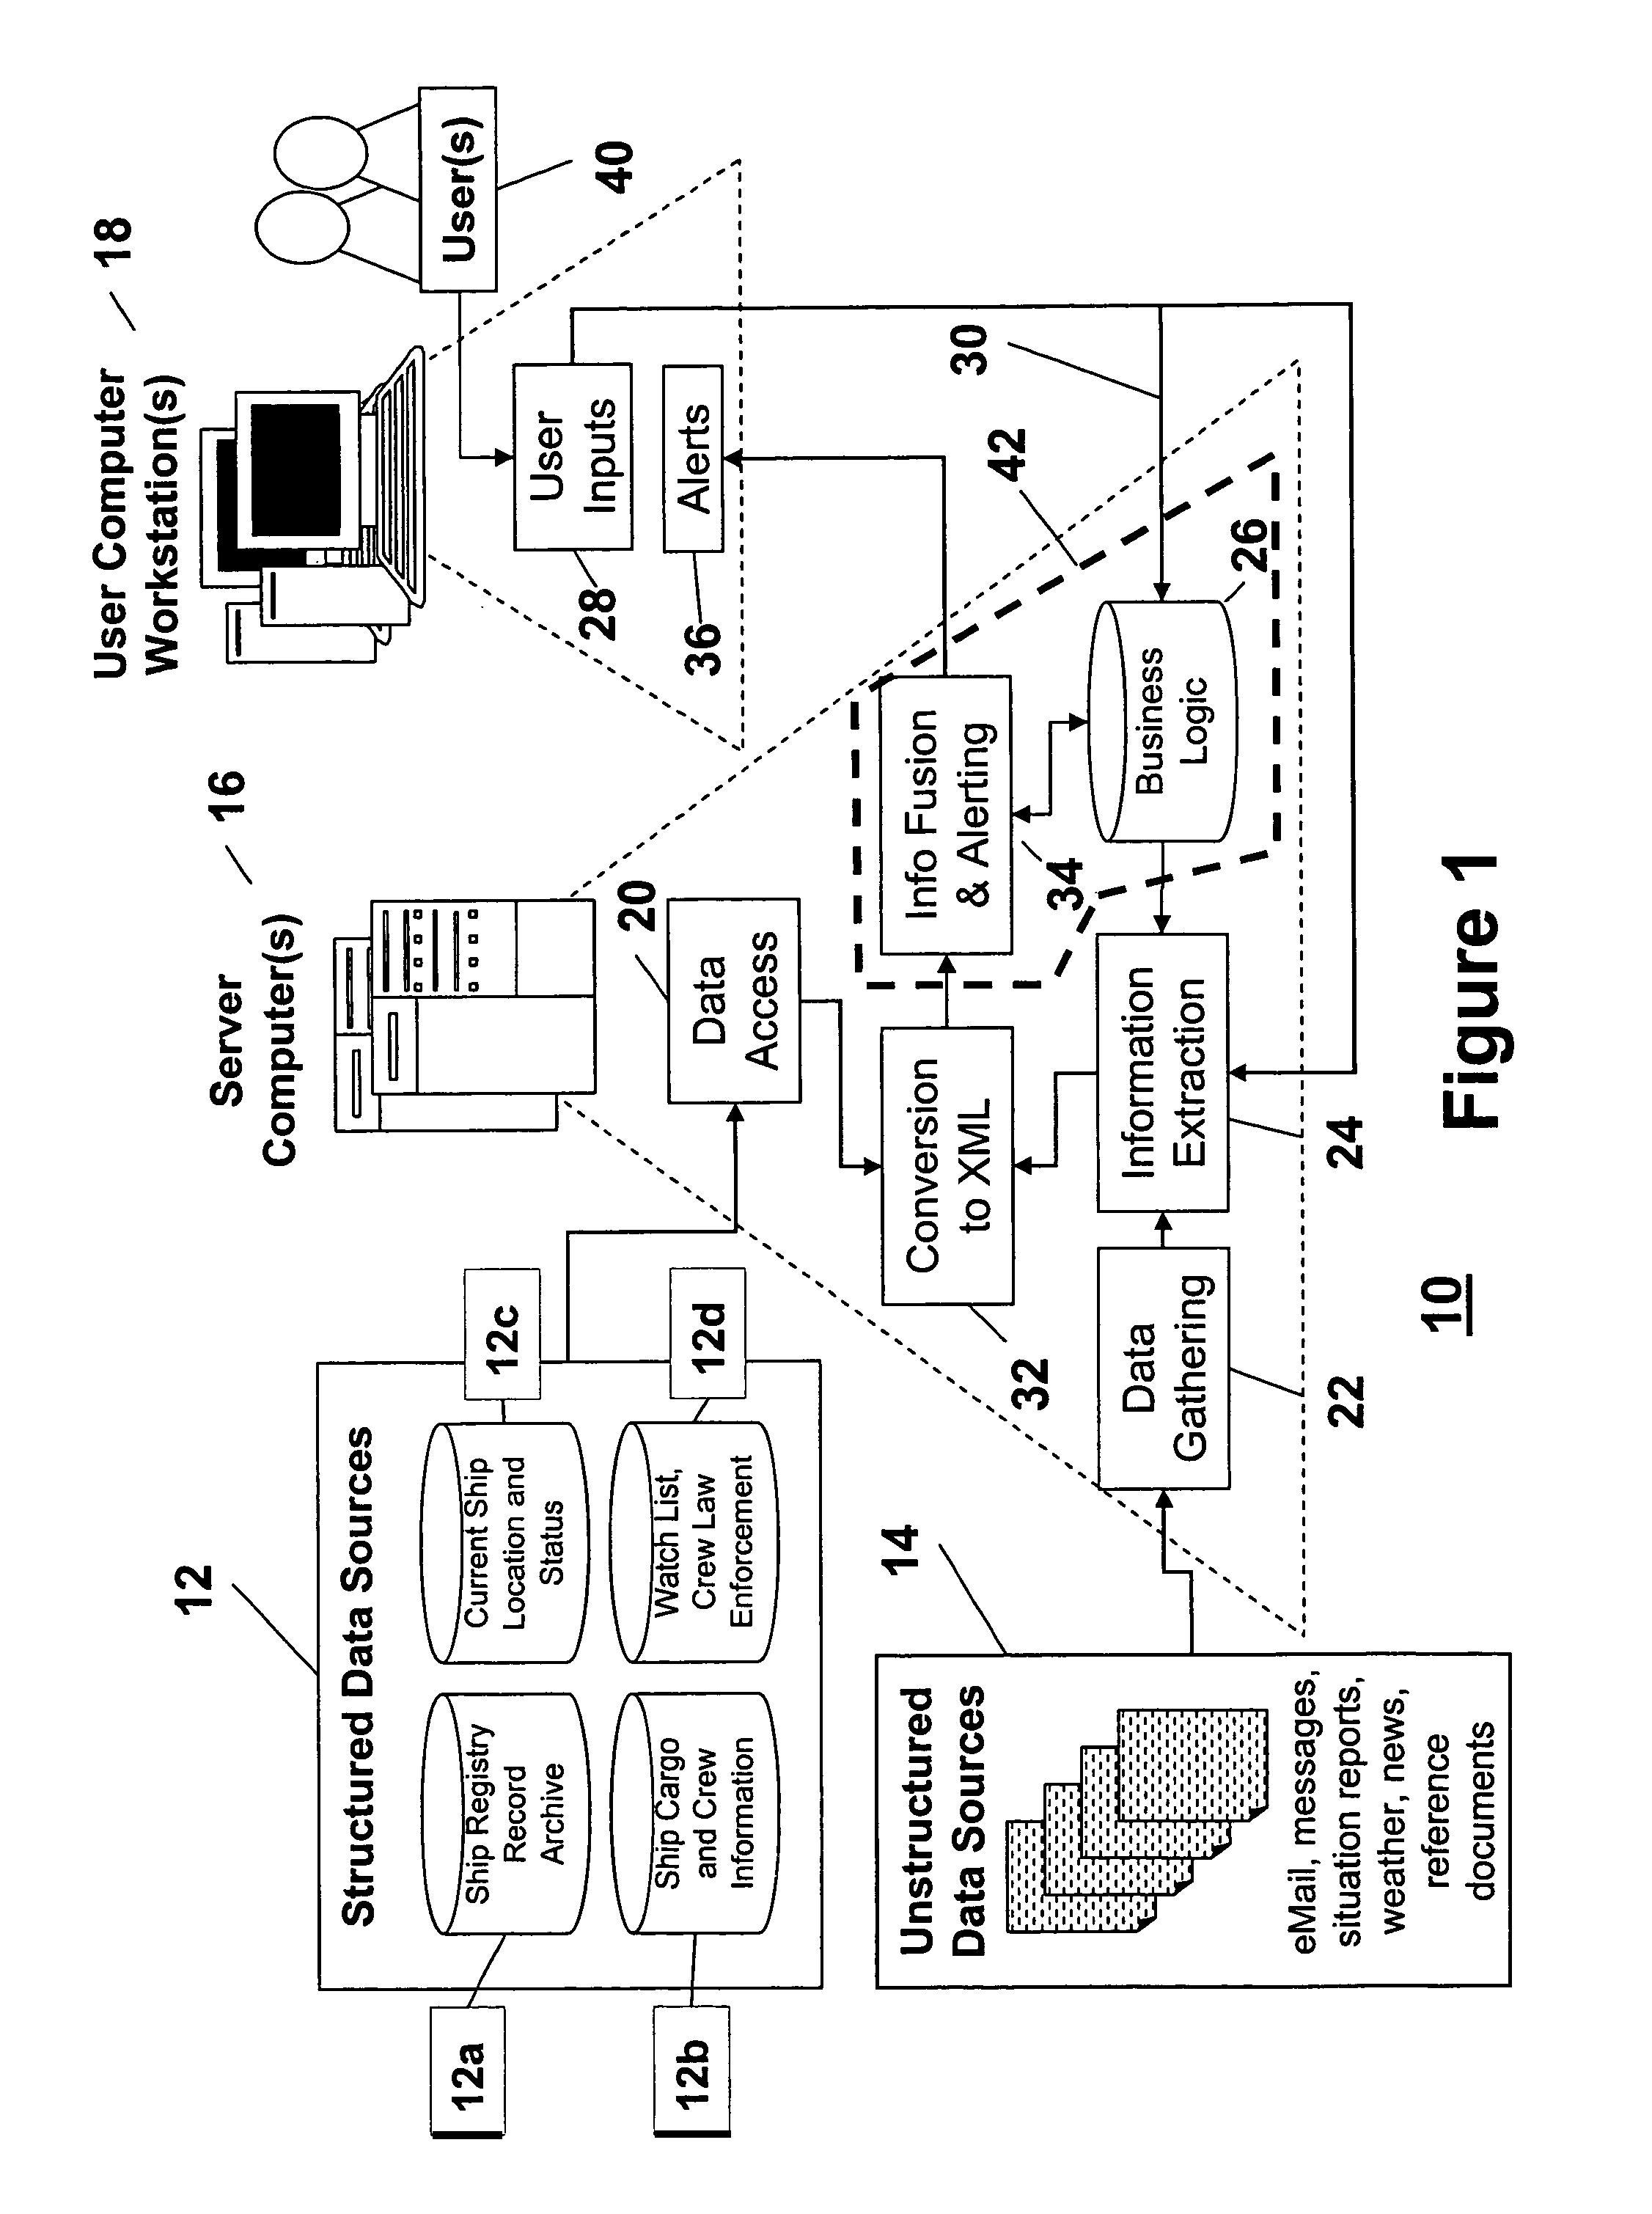 Enhanced dynamic decision support processing using fused multiple disparate data sources